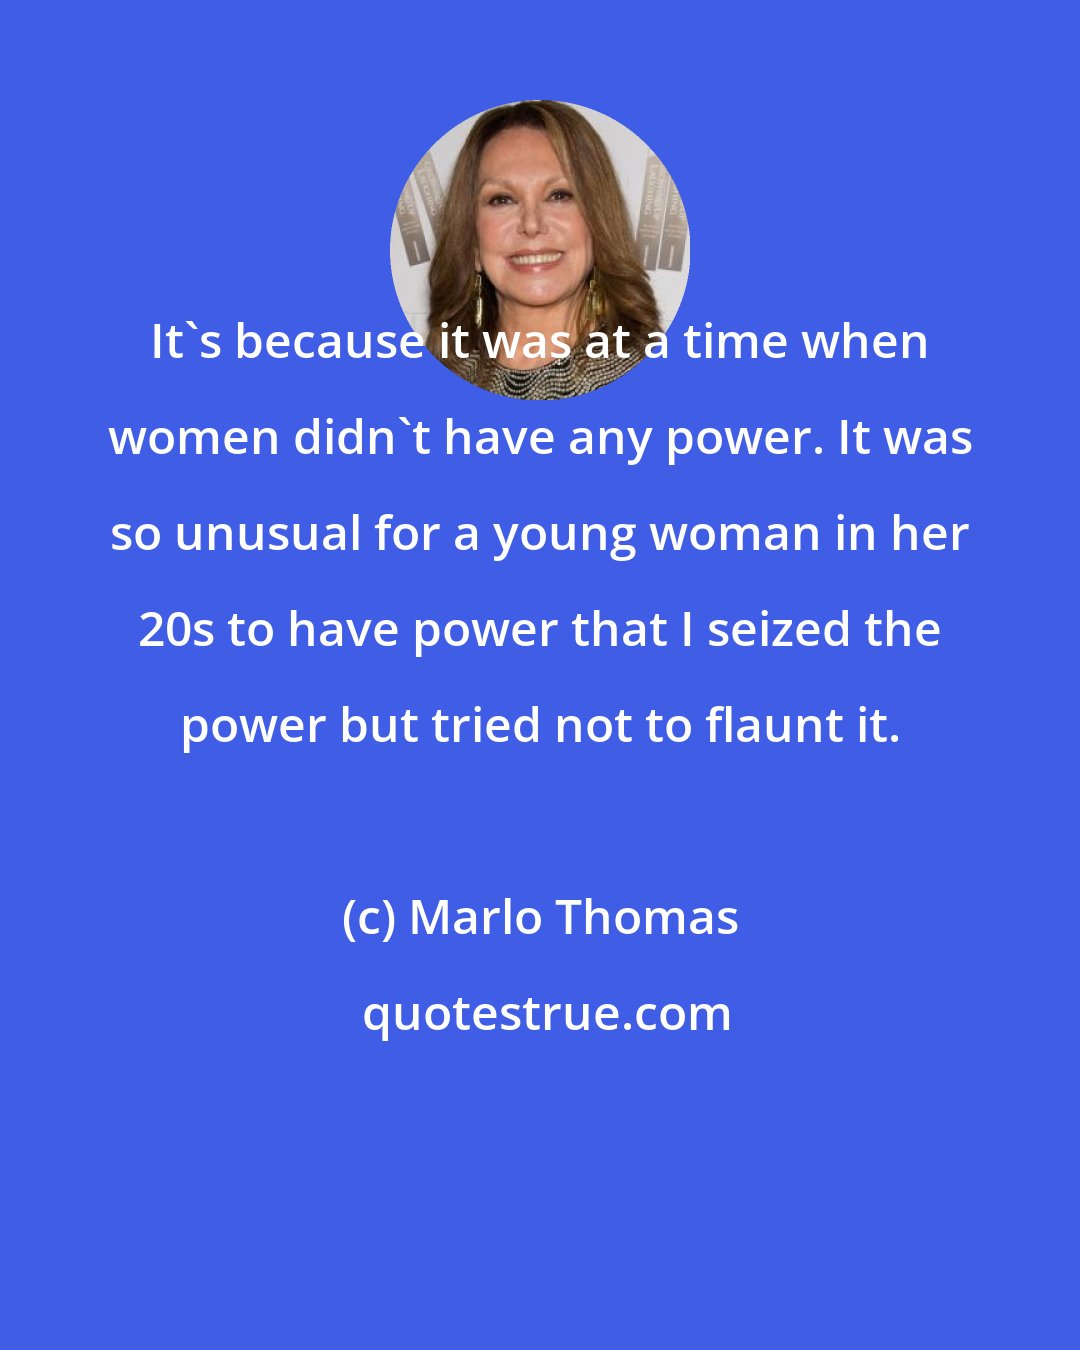 Marlo Thomas: It's because it was at a time when women didn't have any power. It was so unusual for a young woman in her 20s to have power that I seized the power but tried not to flaunt it.